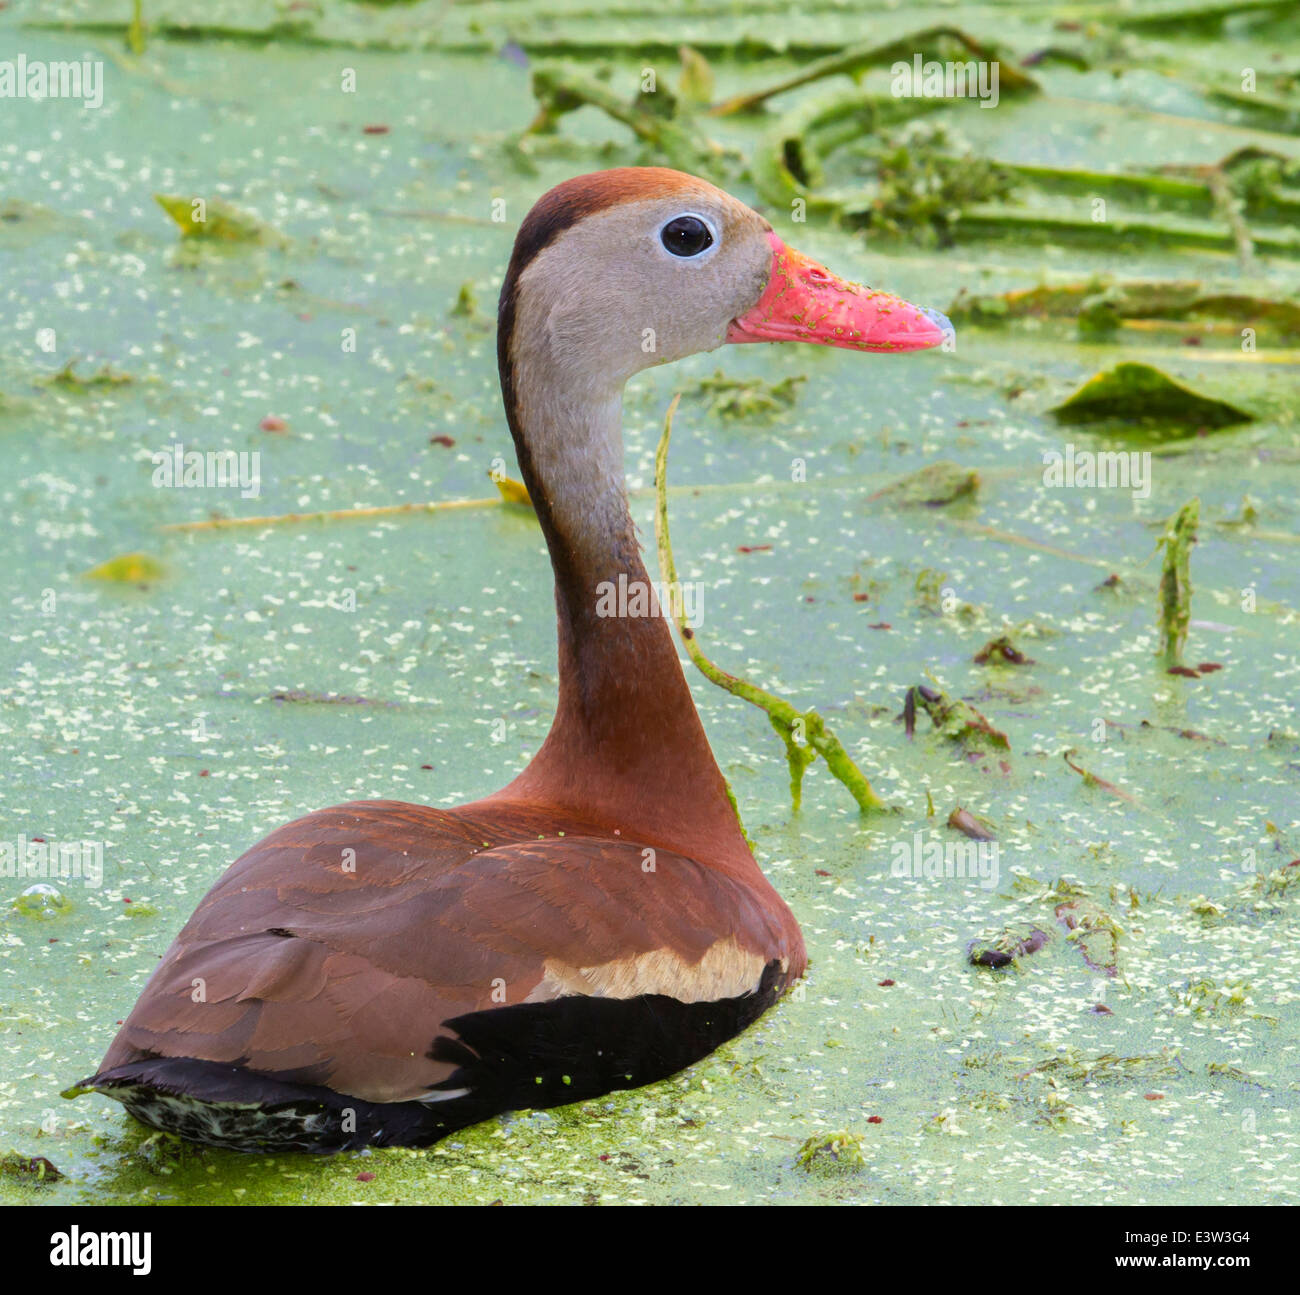 Black-bellied whistling ducks (Dendrocygna autumnalis) in a swamp covered with duckweed. Stock Photo